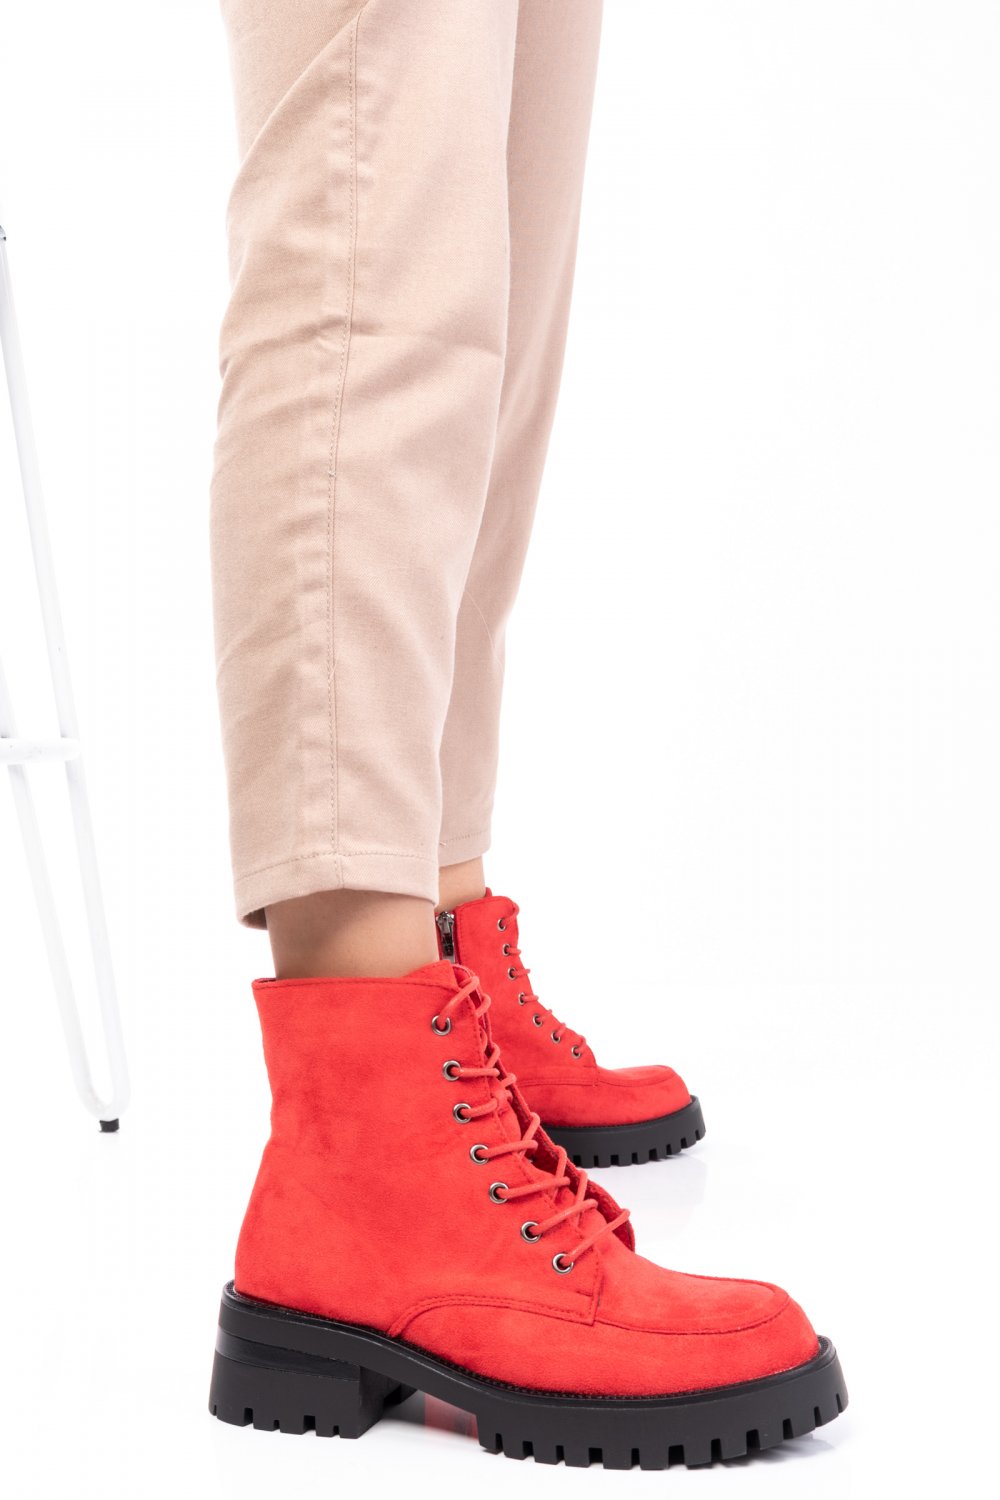 GHETE RED SUEDE FSPBW031